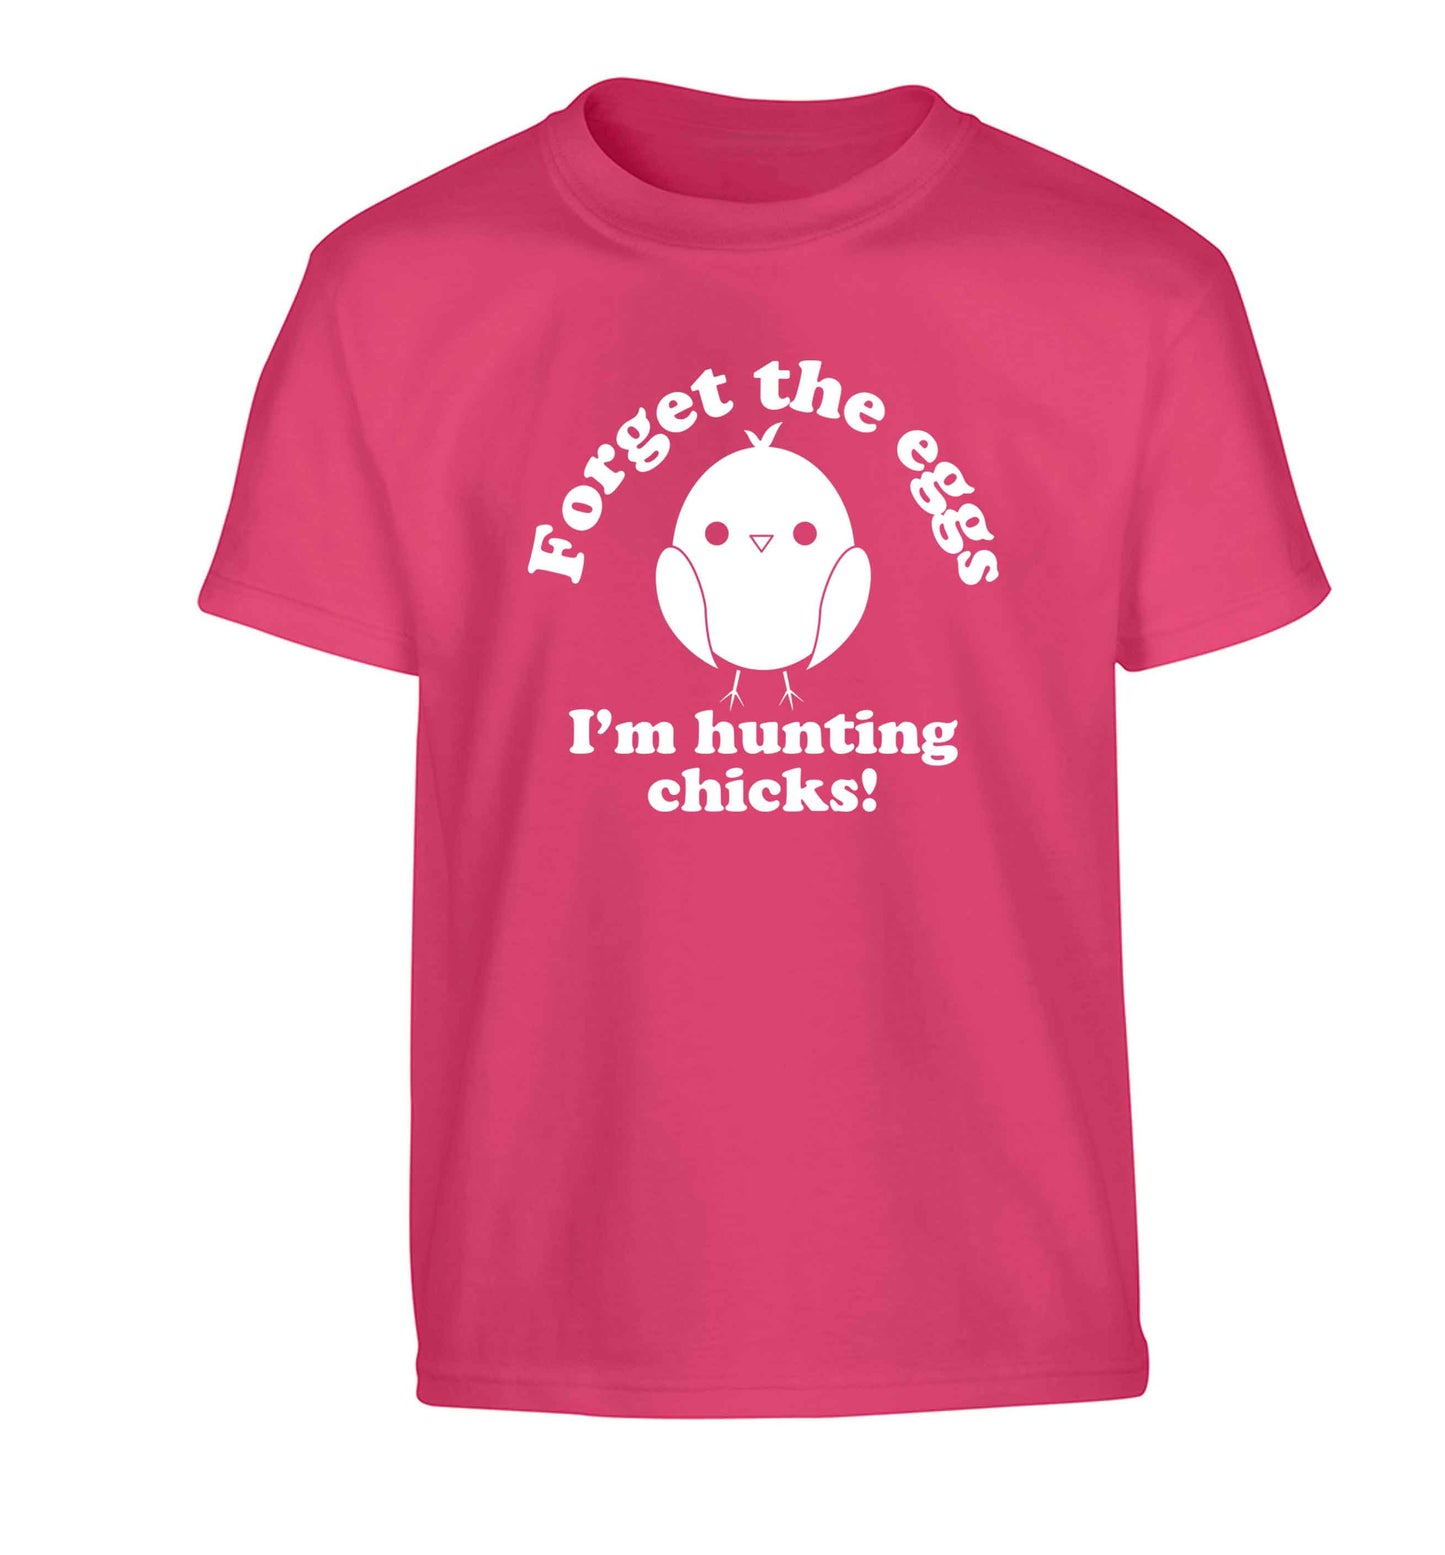 Forget the eggs I'm hunting chicks! Children's pink Tshirt 12-13 Years